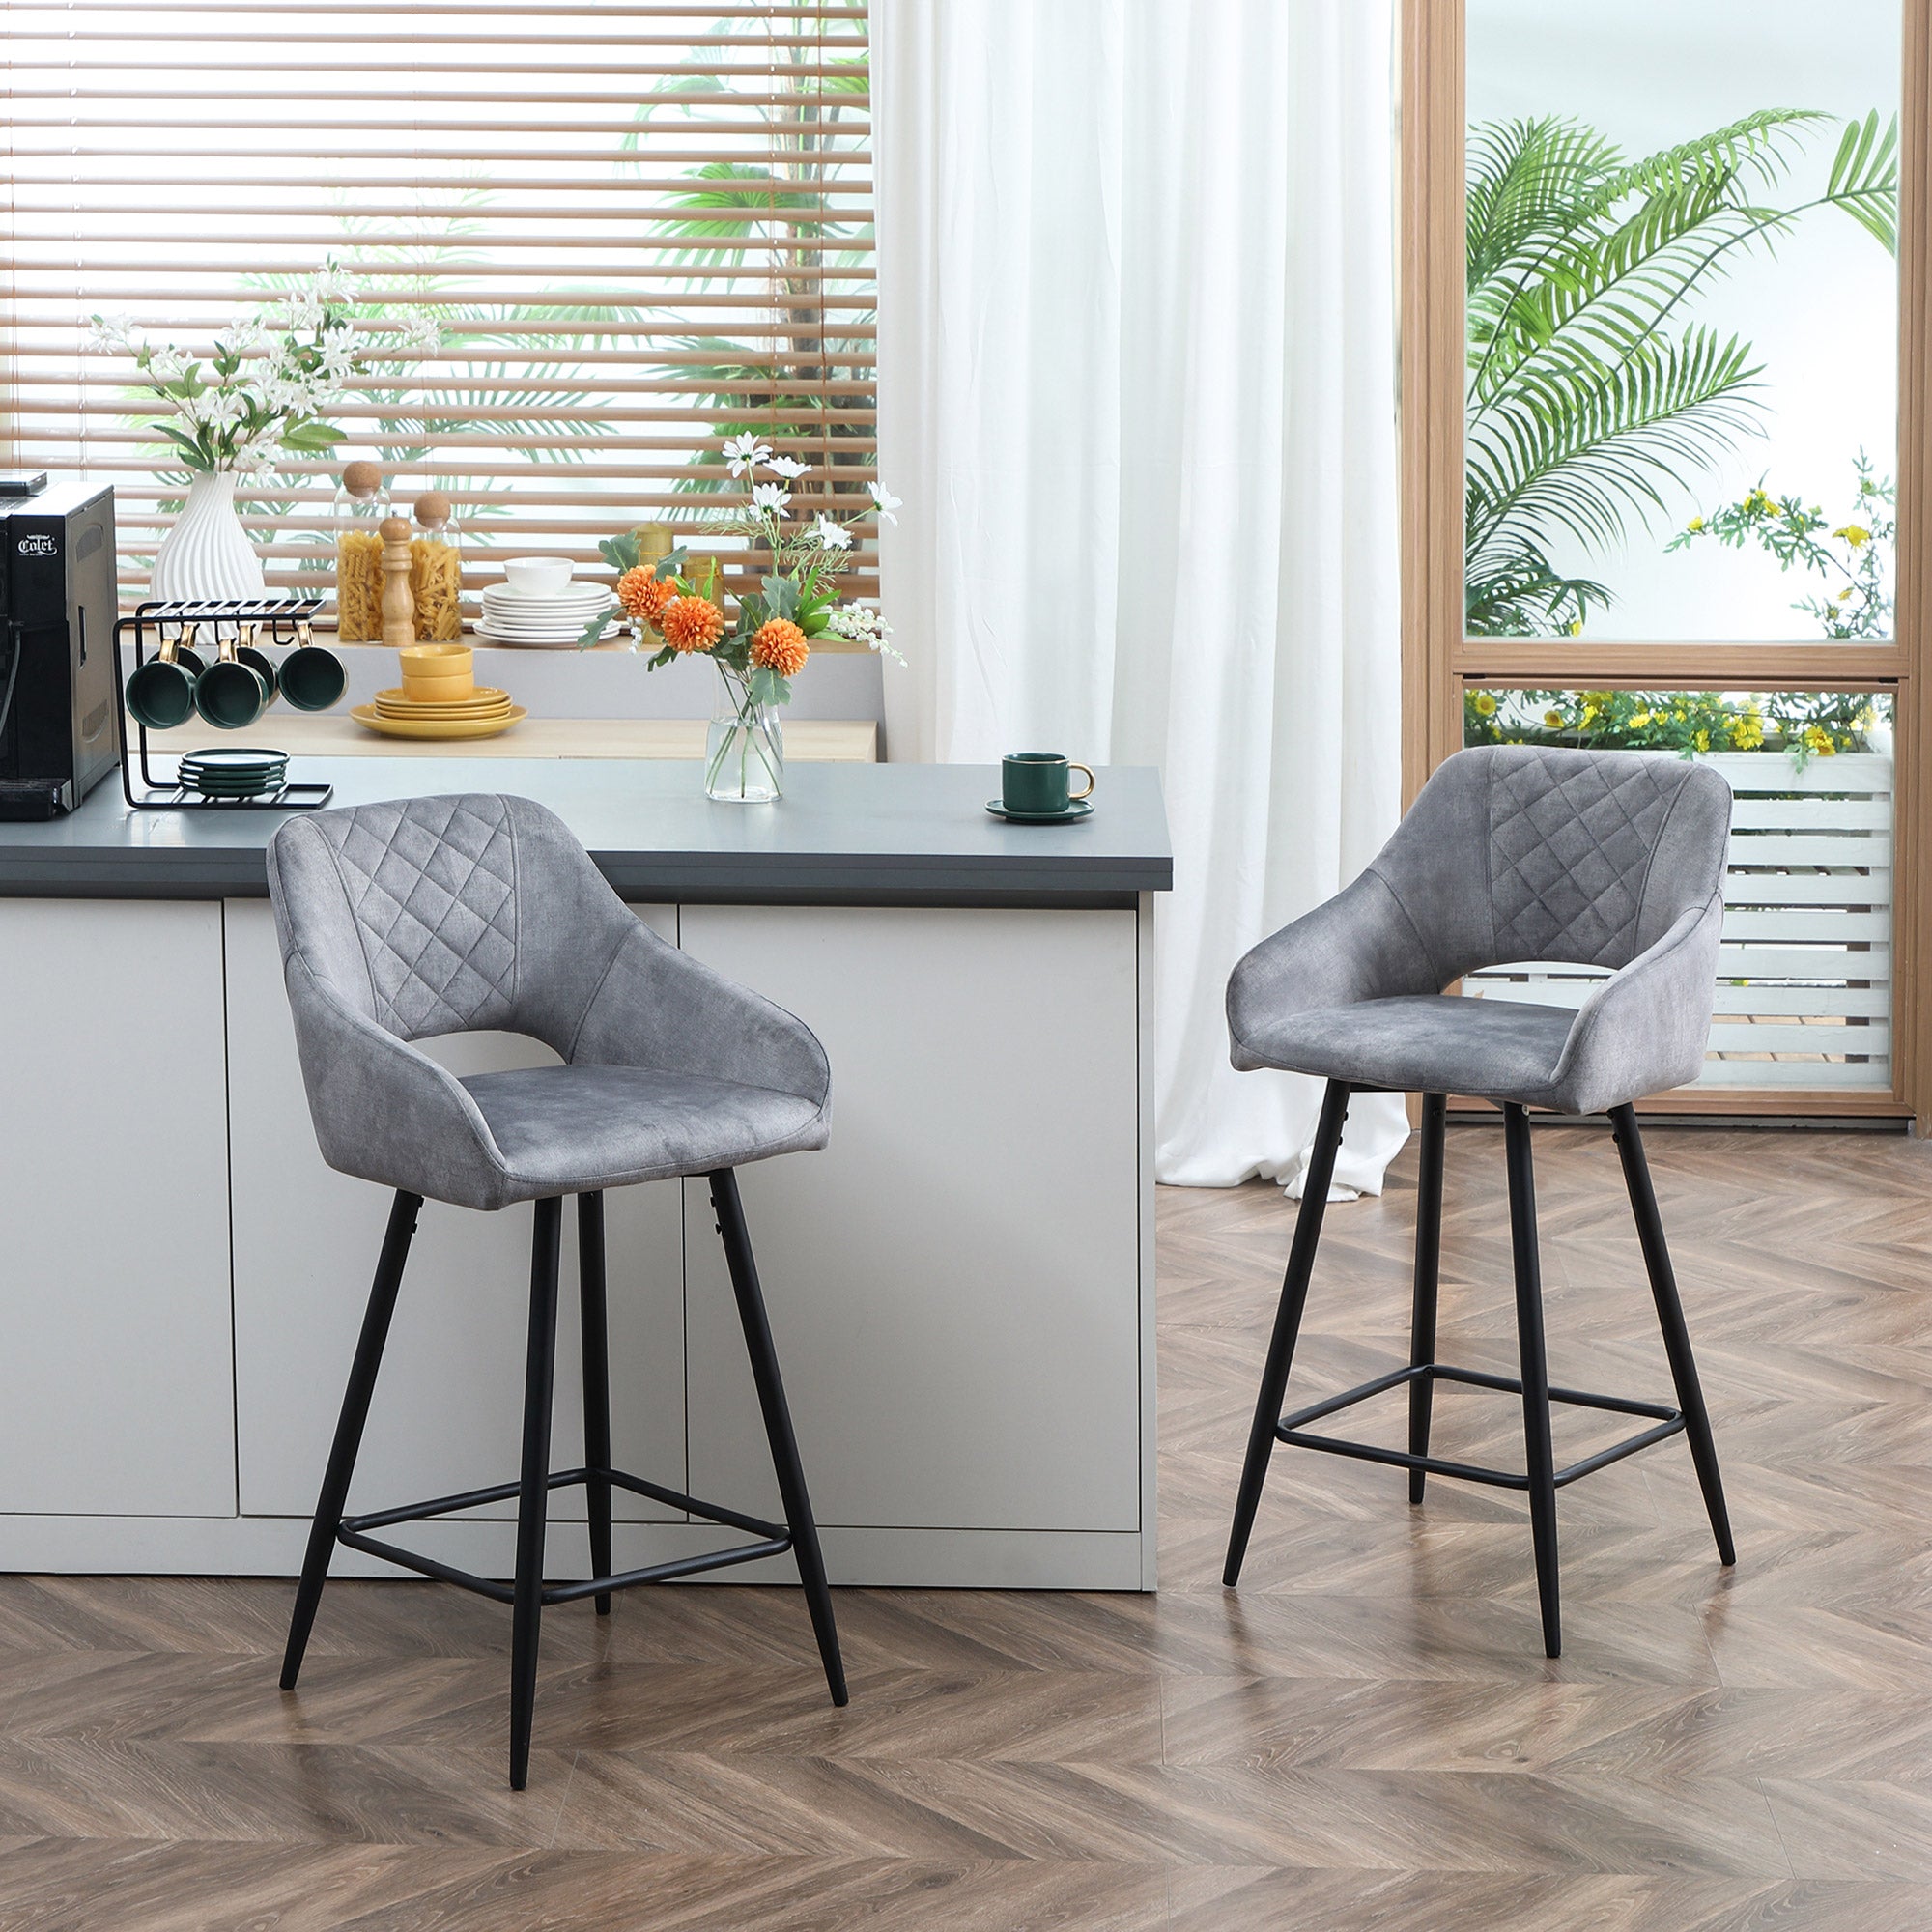 Set of 2 Bar stools With Backs, Velvet-Touch Fabric Counter Height Bar Chairs, Kitchen Stools with Steel Legs for Dining Area, Grey  AOSOM   